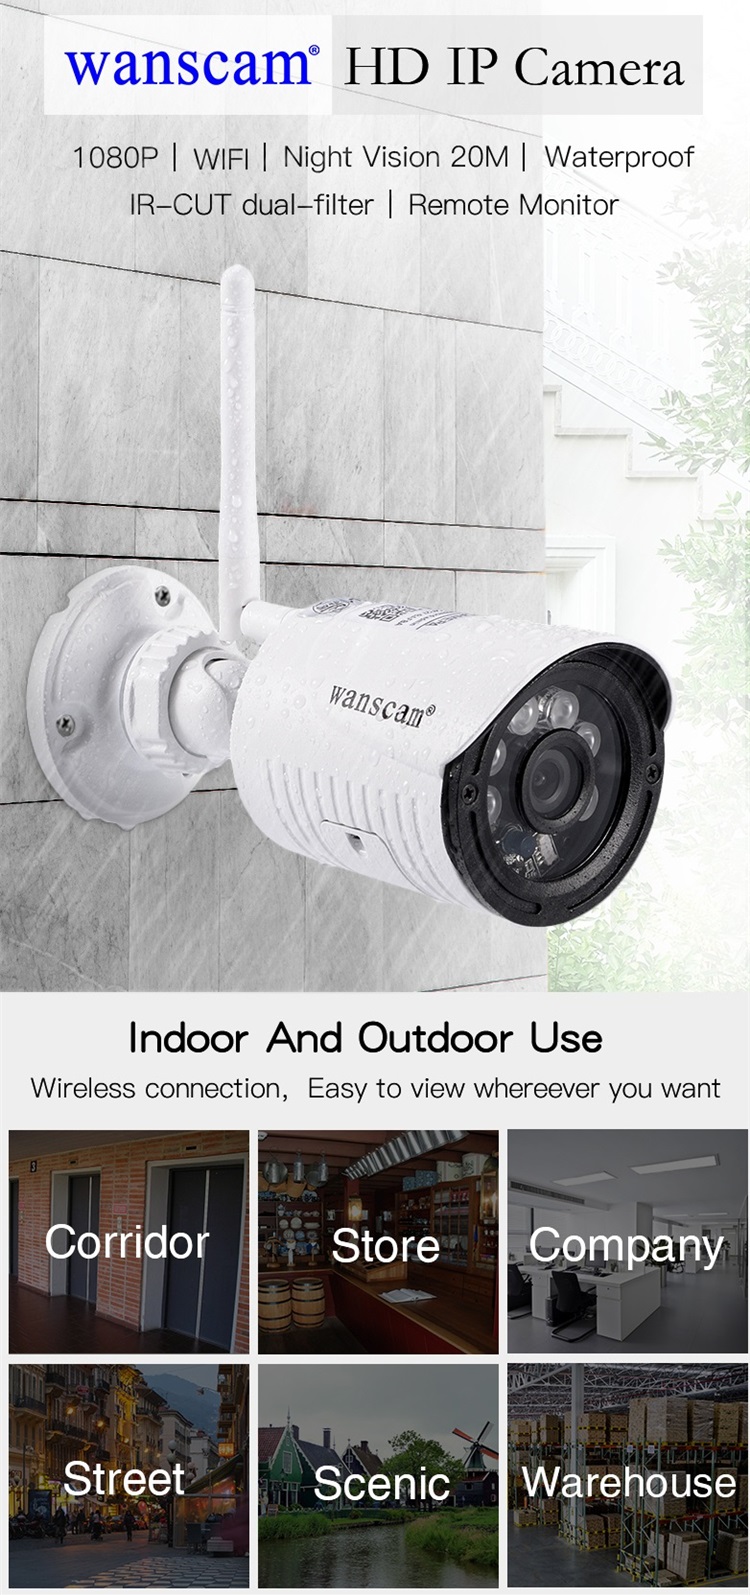 Wanscam HW0022 1080P WiFi IP Camera Wireless CCTV 2MP Outdoor Waterproof Onvif Security Camera Support 128G TF Card 117